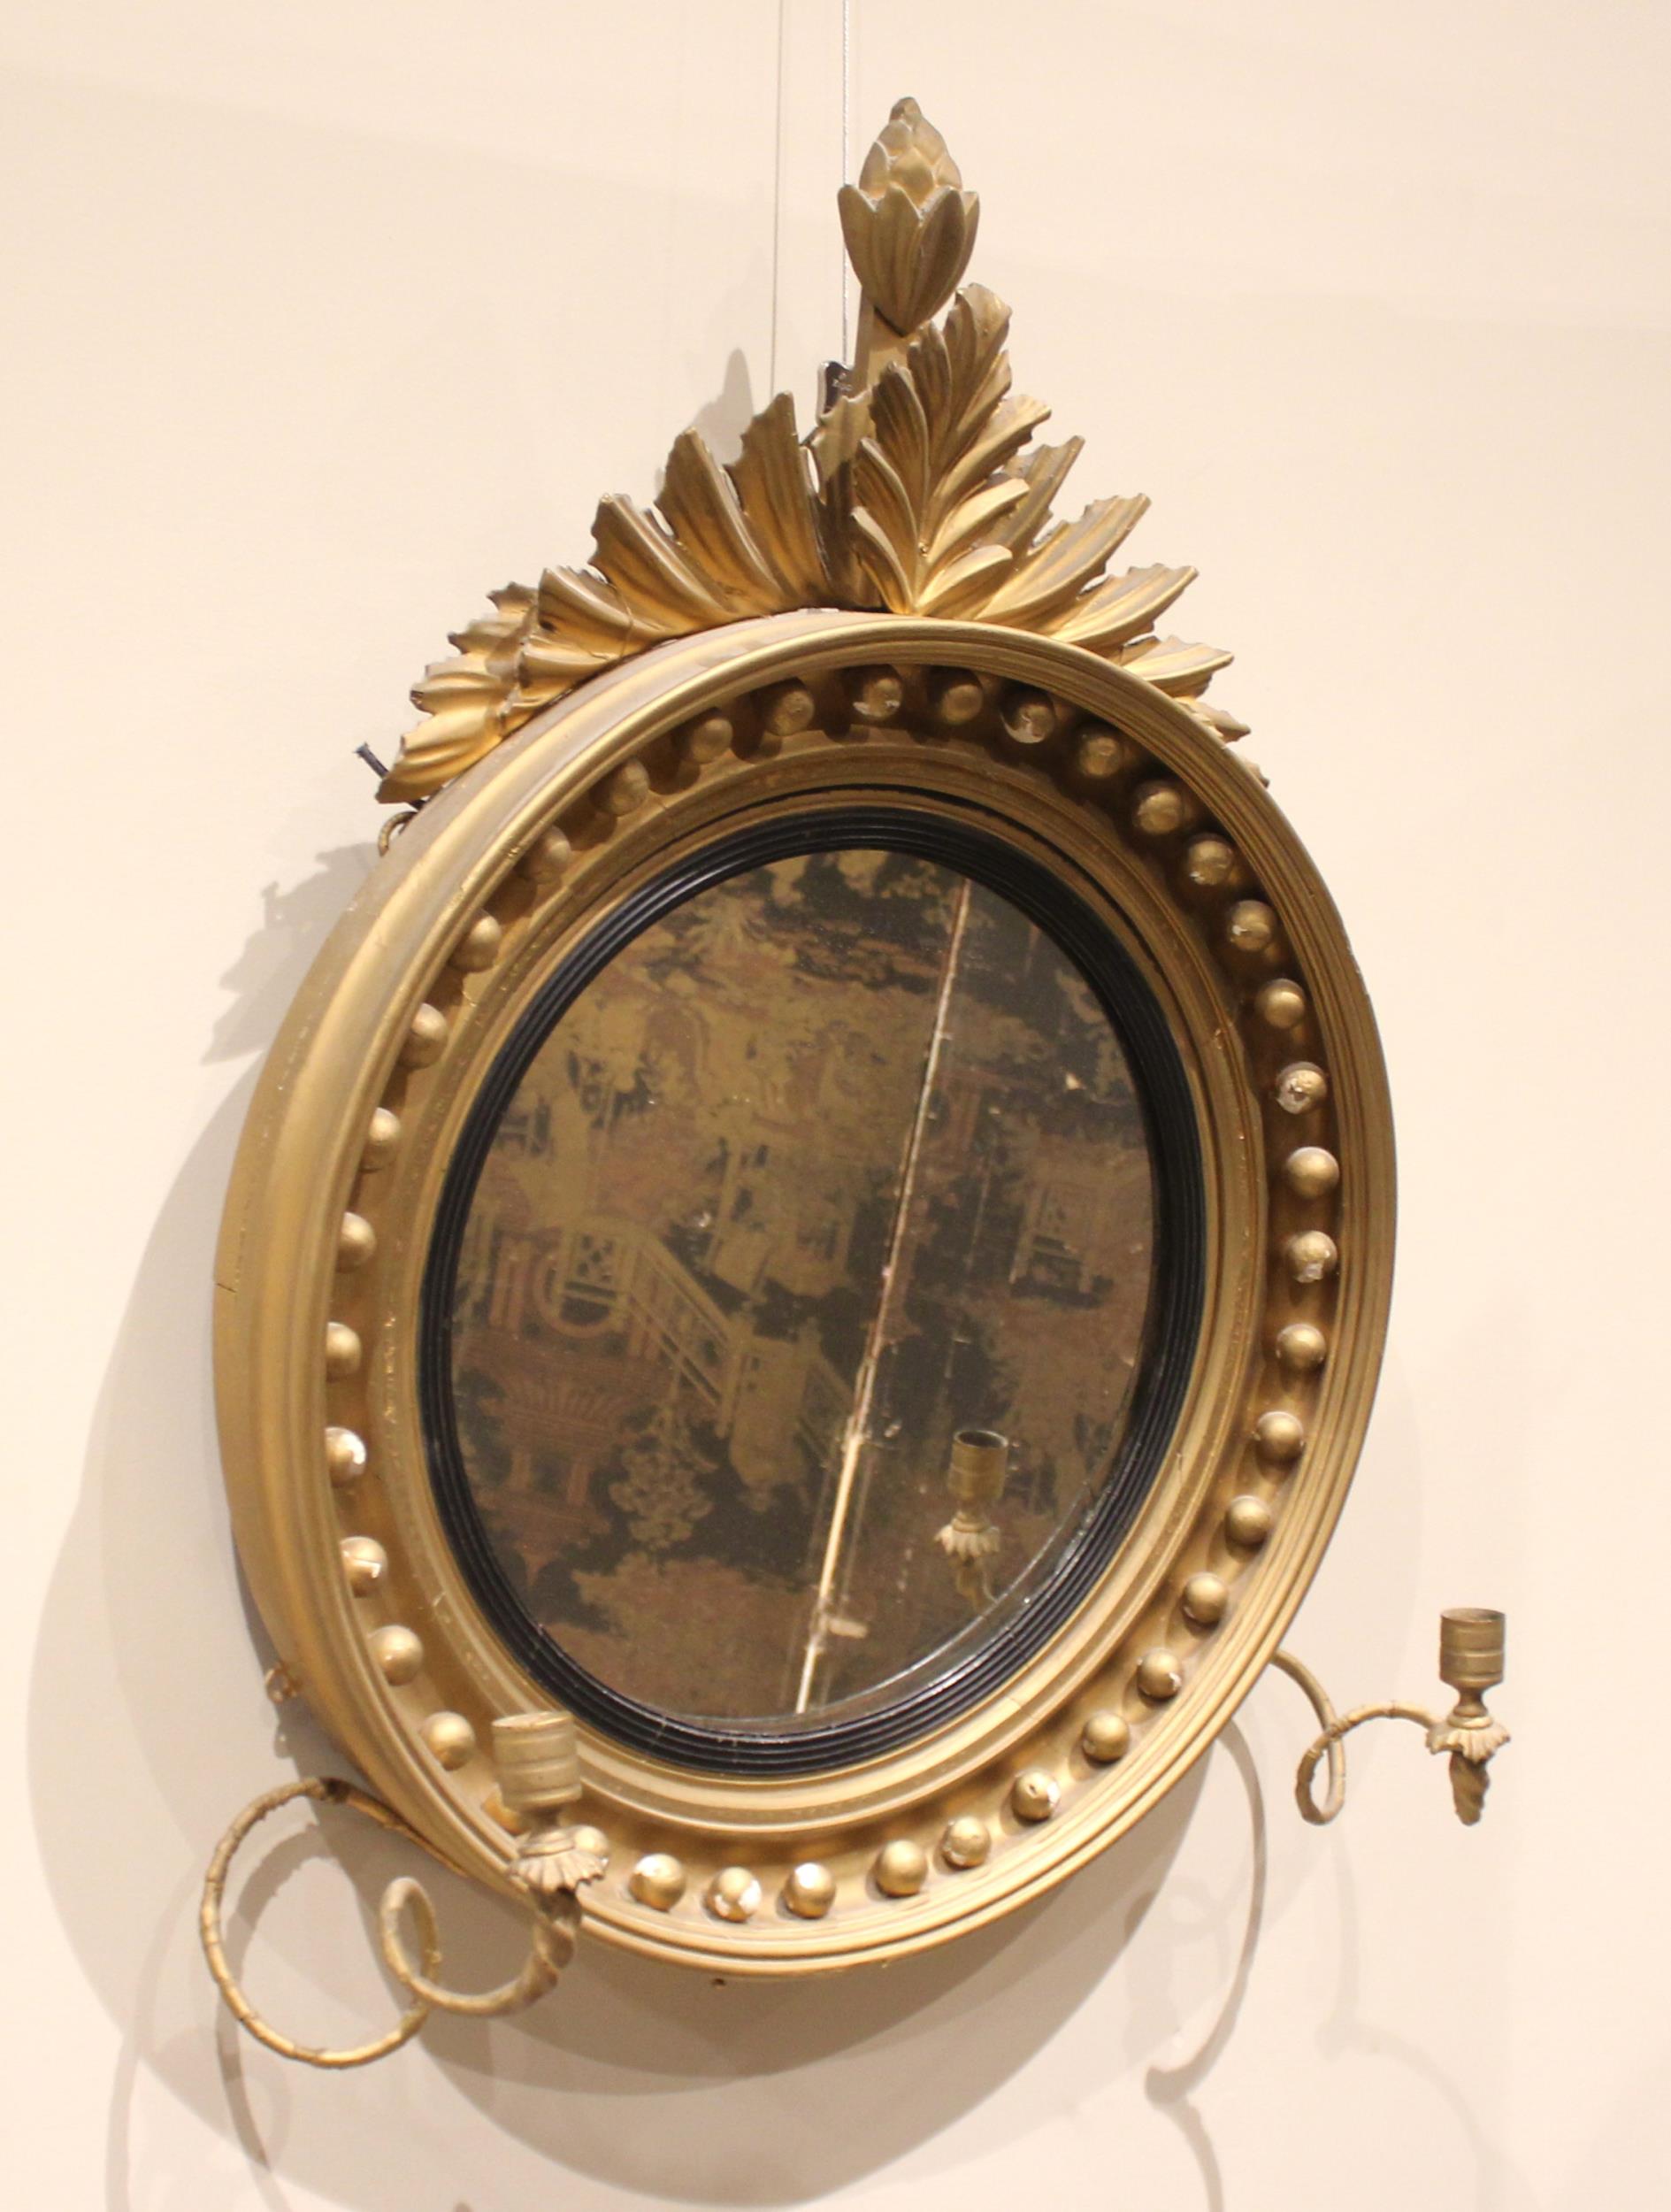 A Regency girandole wall mirror, with a leafy fruit crest over the moulded circular frame applied